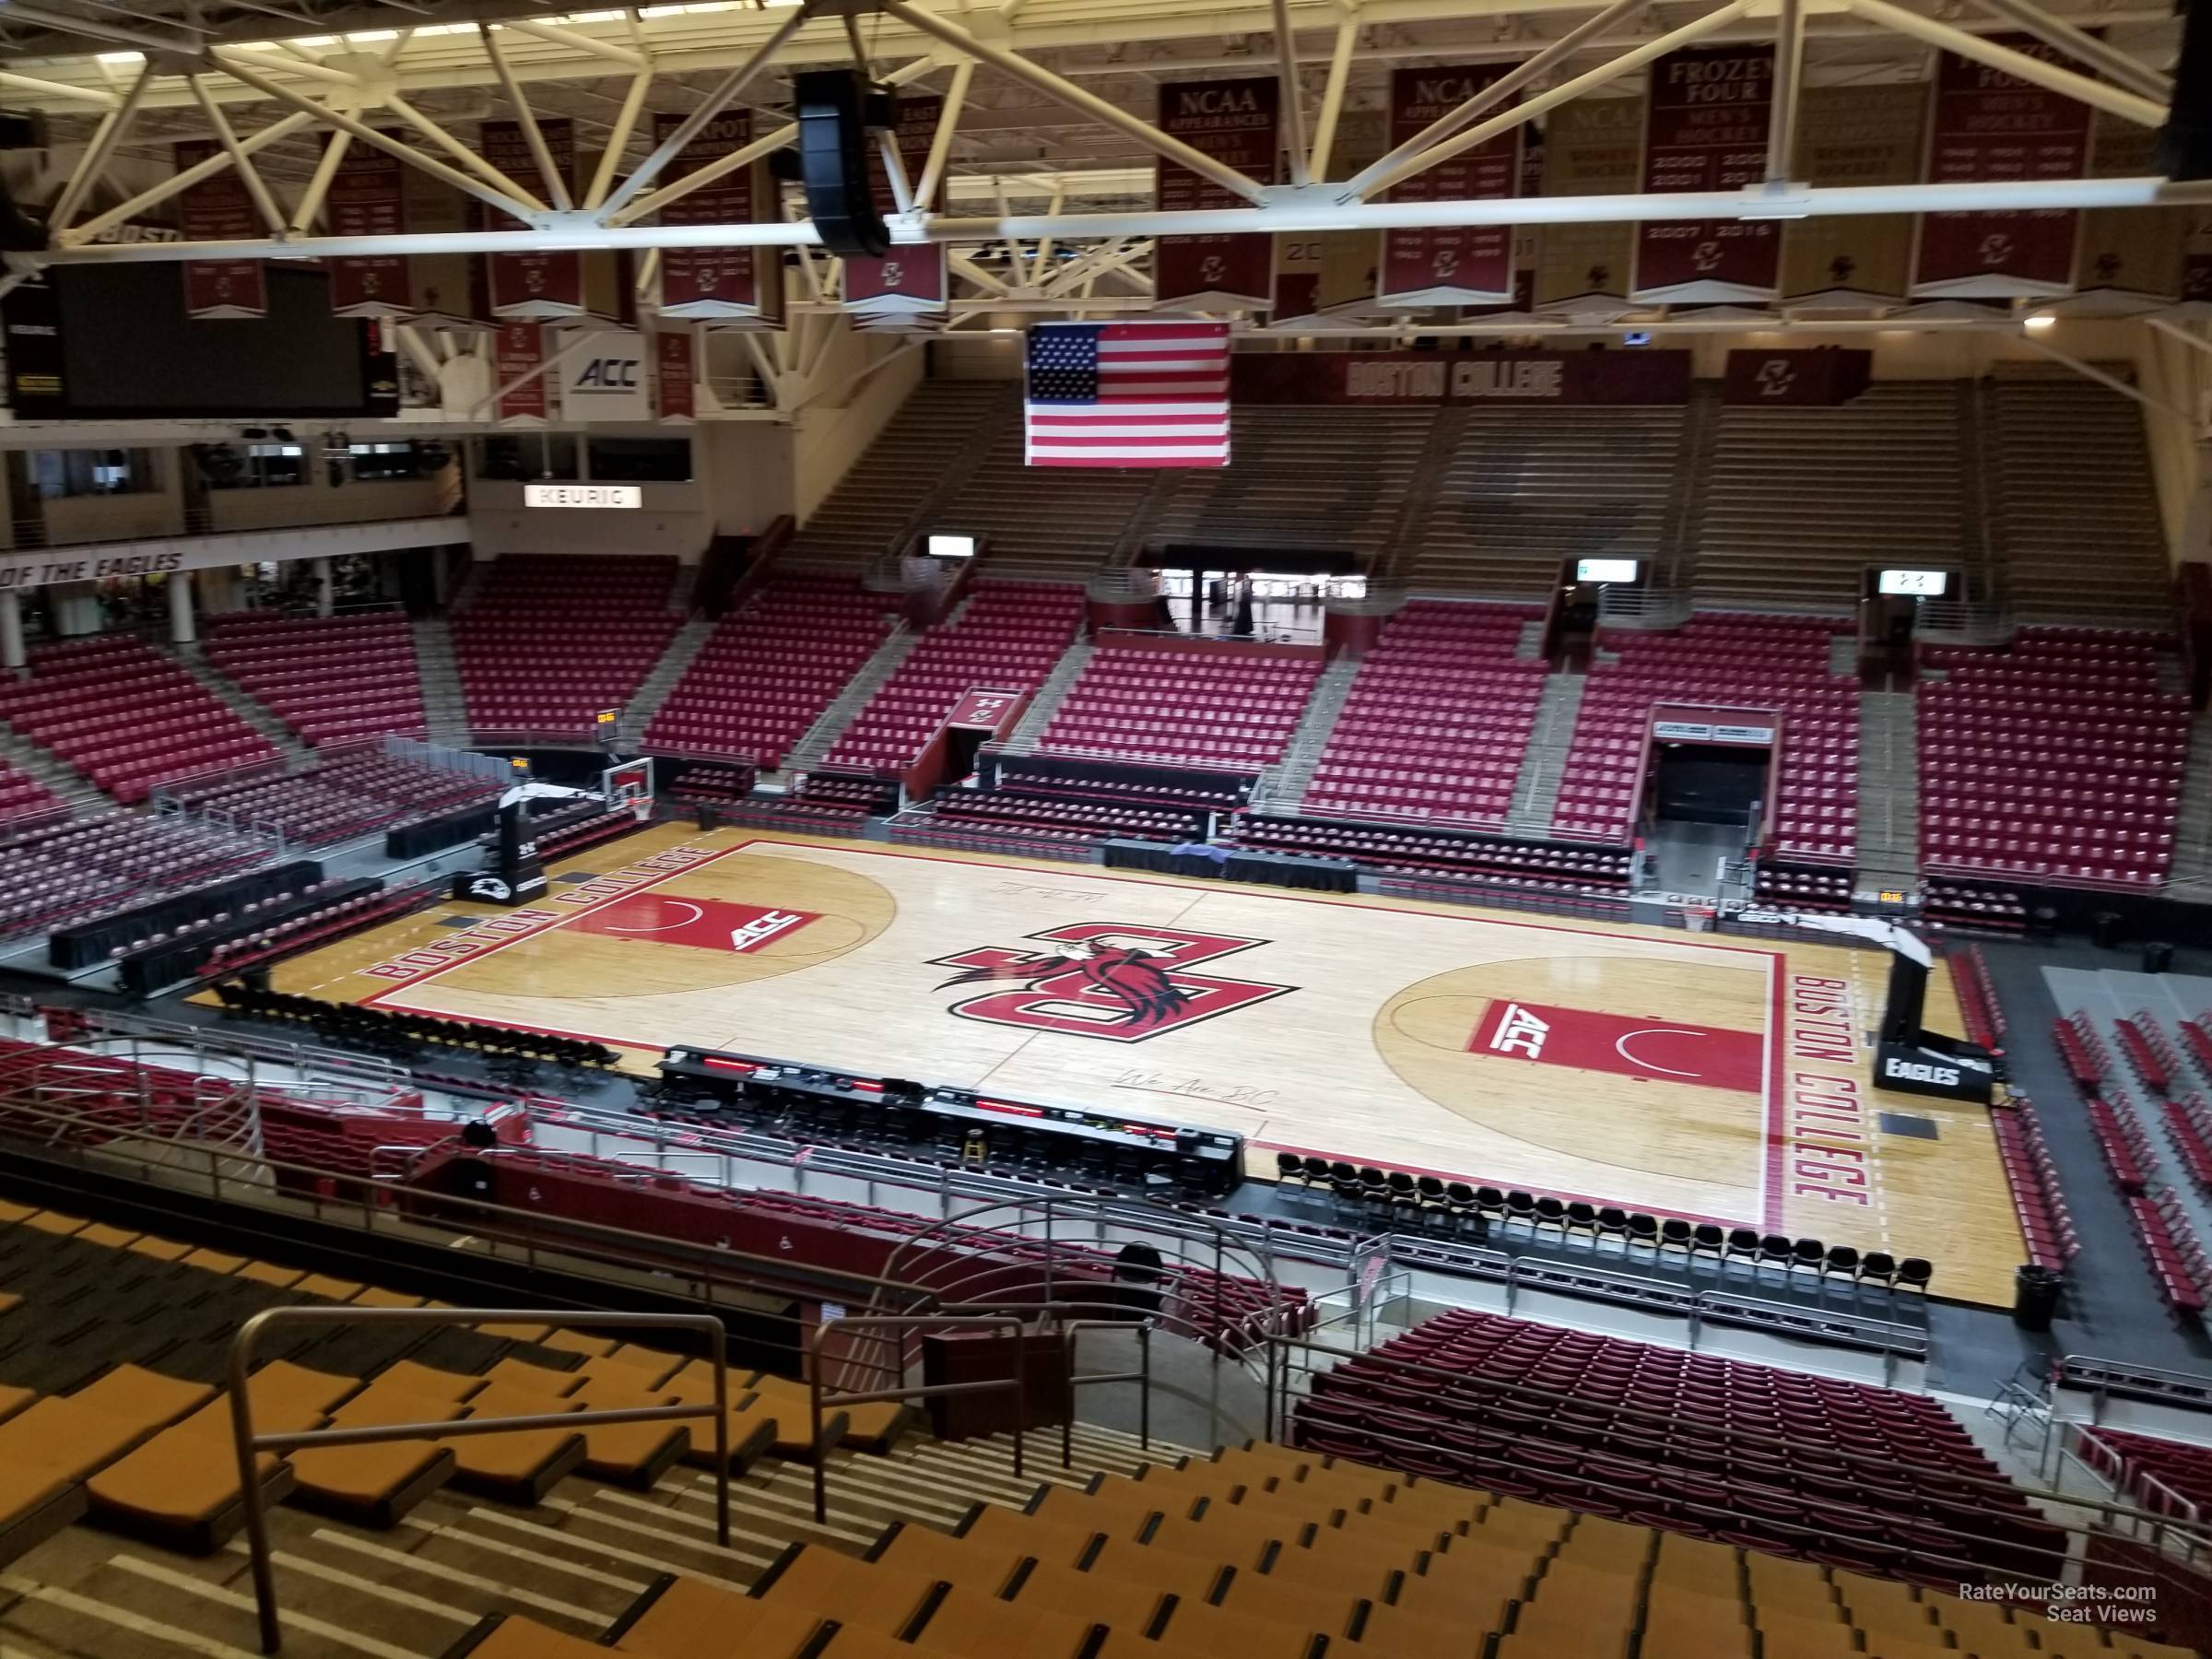 section kk, row 16 seat view  - conte forum